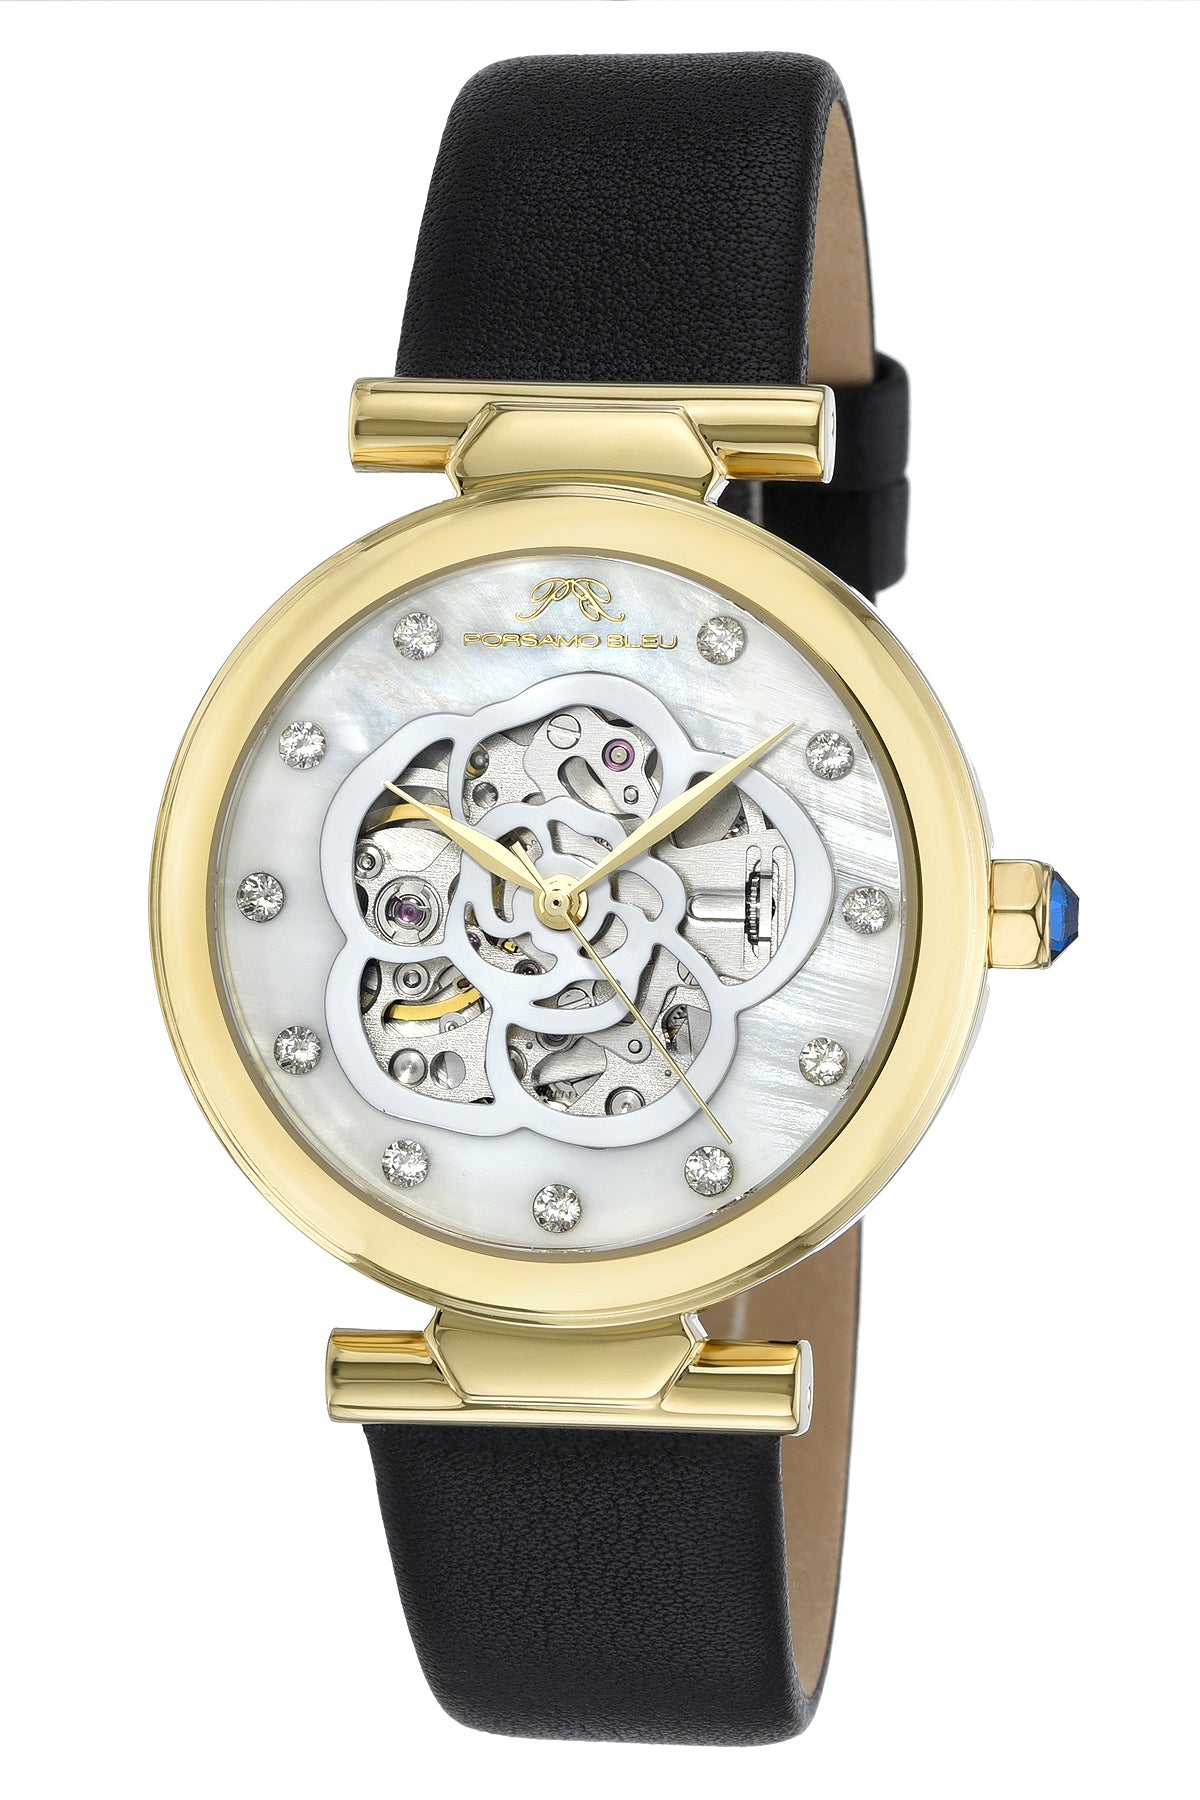 Porsamo Bleu Laura Luxury Automatic Topaz Women's Genuine Leather Band Watch, With Mother Of Pearl Skeleton Dial, Gold, Black 1211BLAL